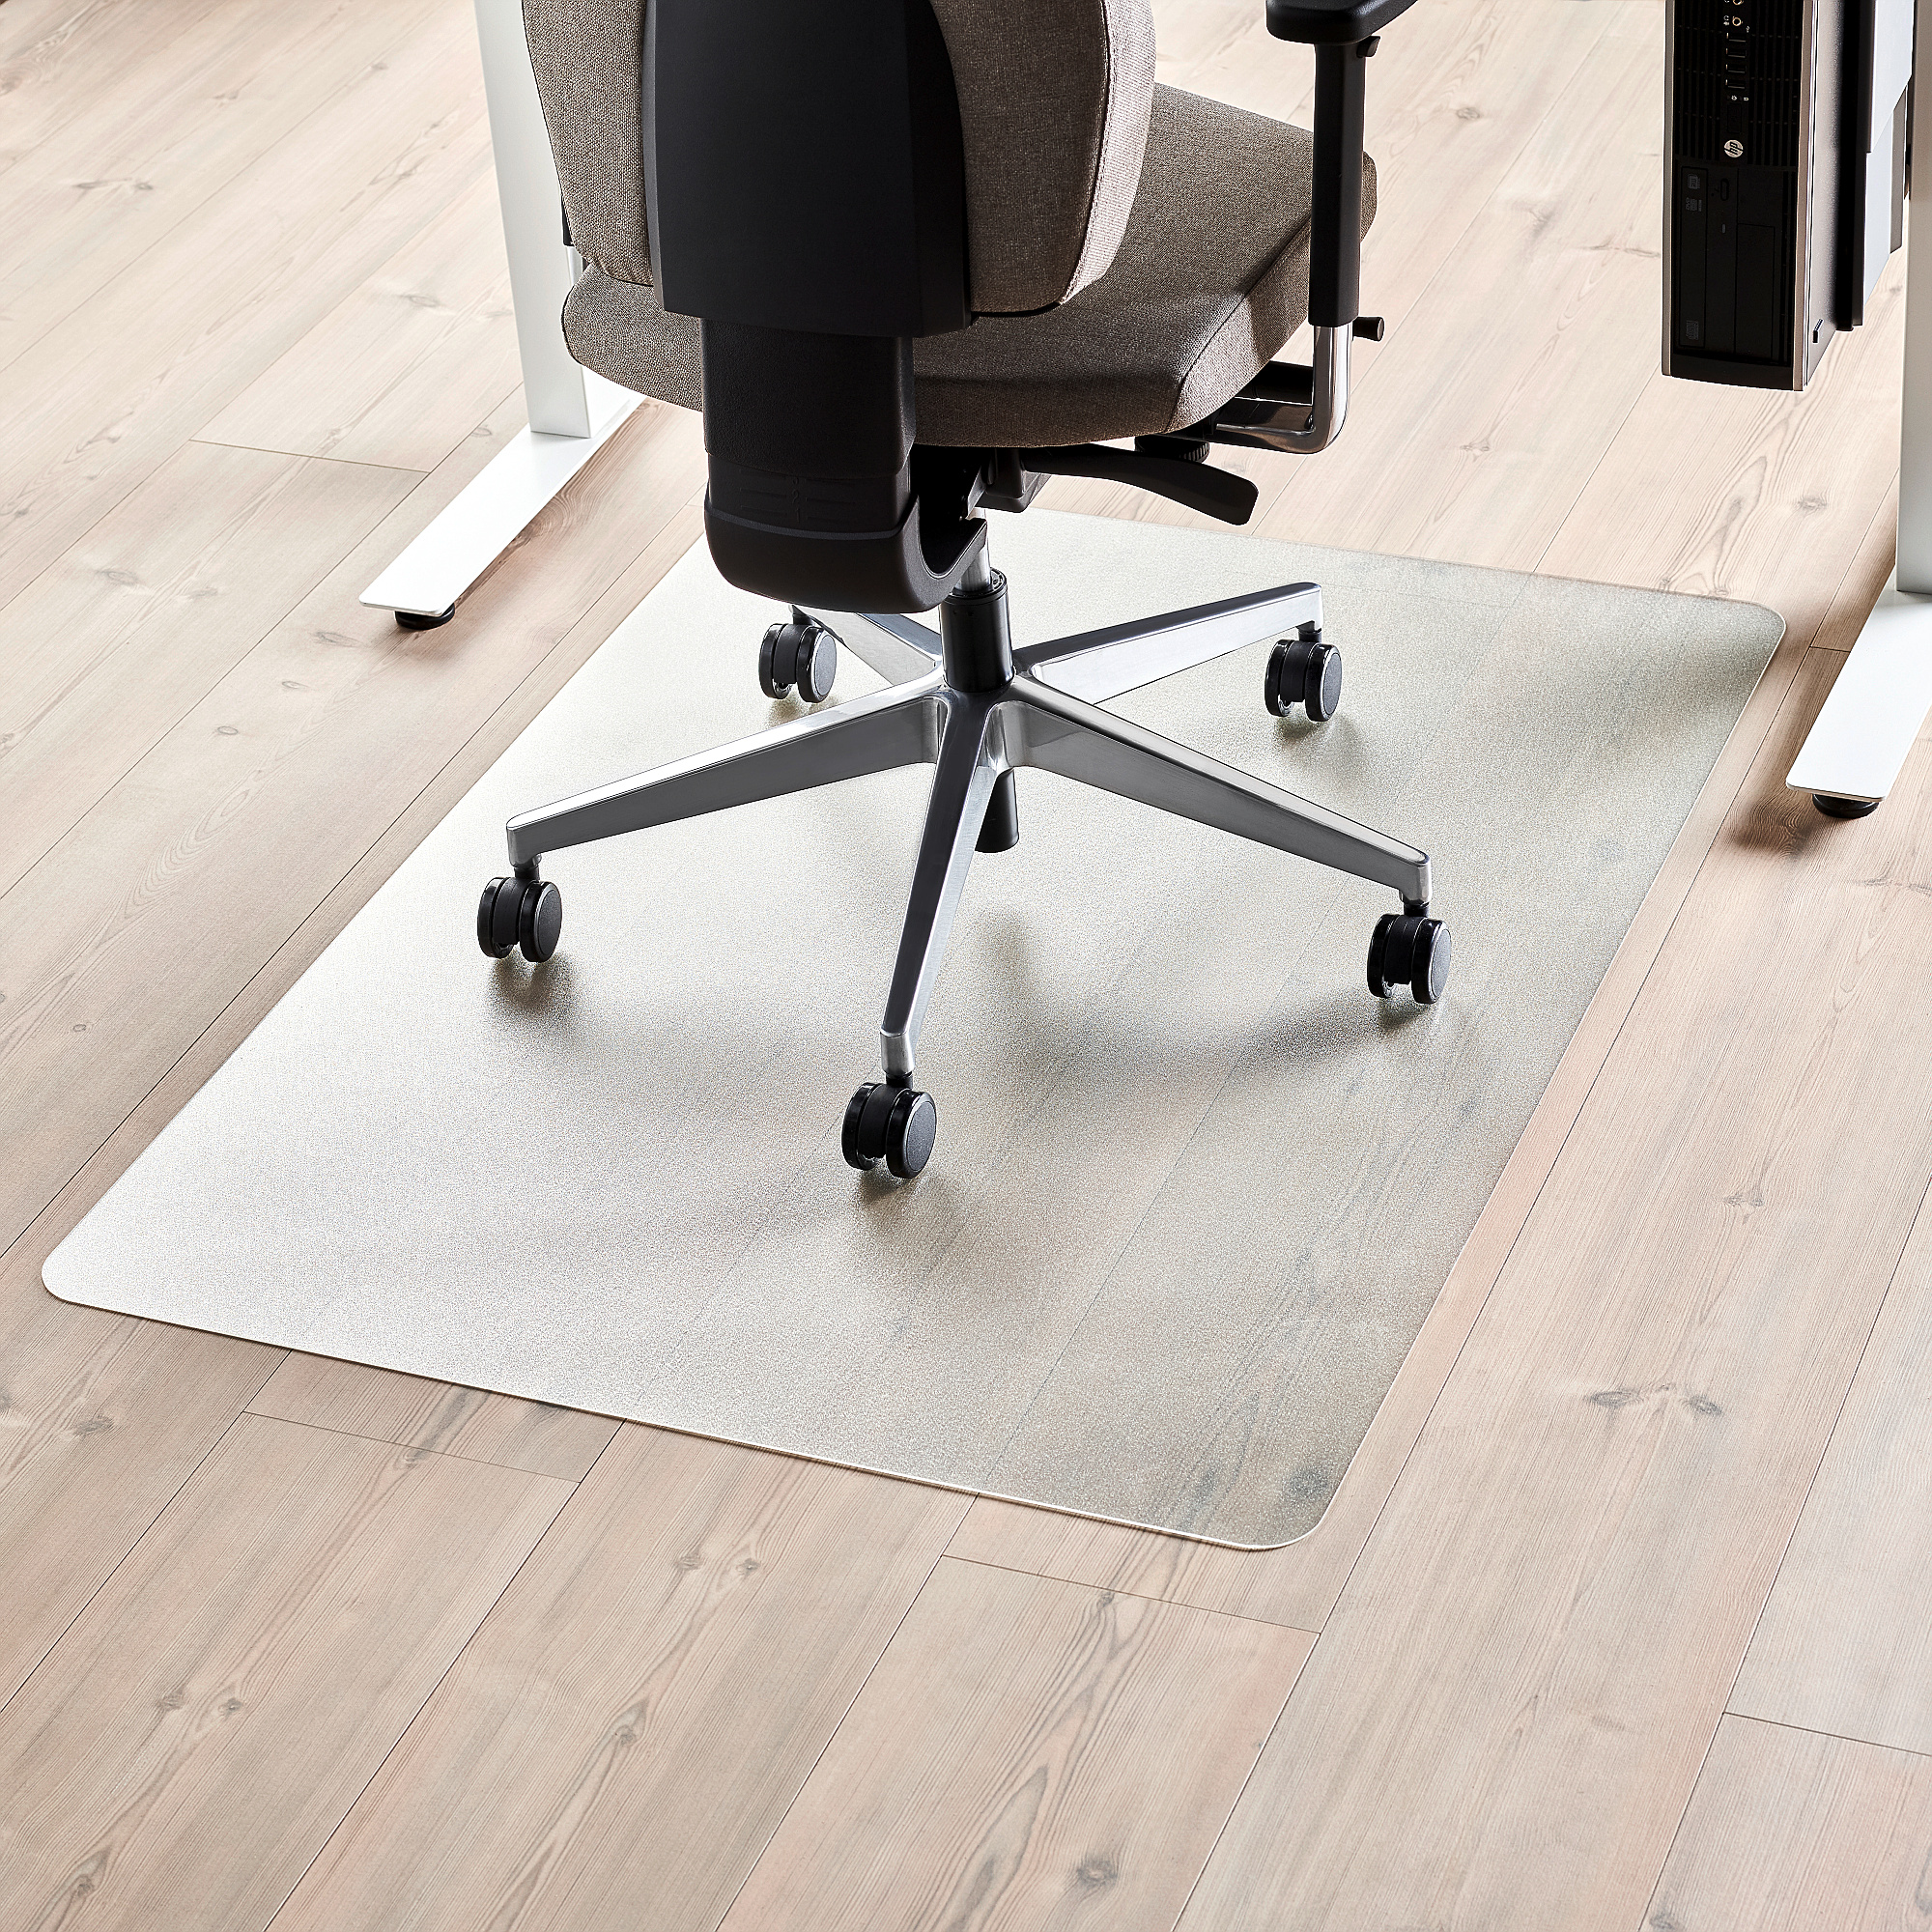 Chair Mat For Hard Floors 900x1200 Mm, What Do You Put Under Office Chair On Hardwood